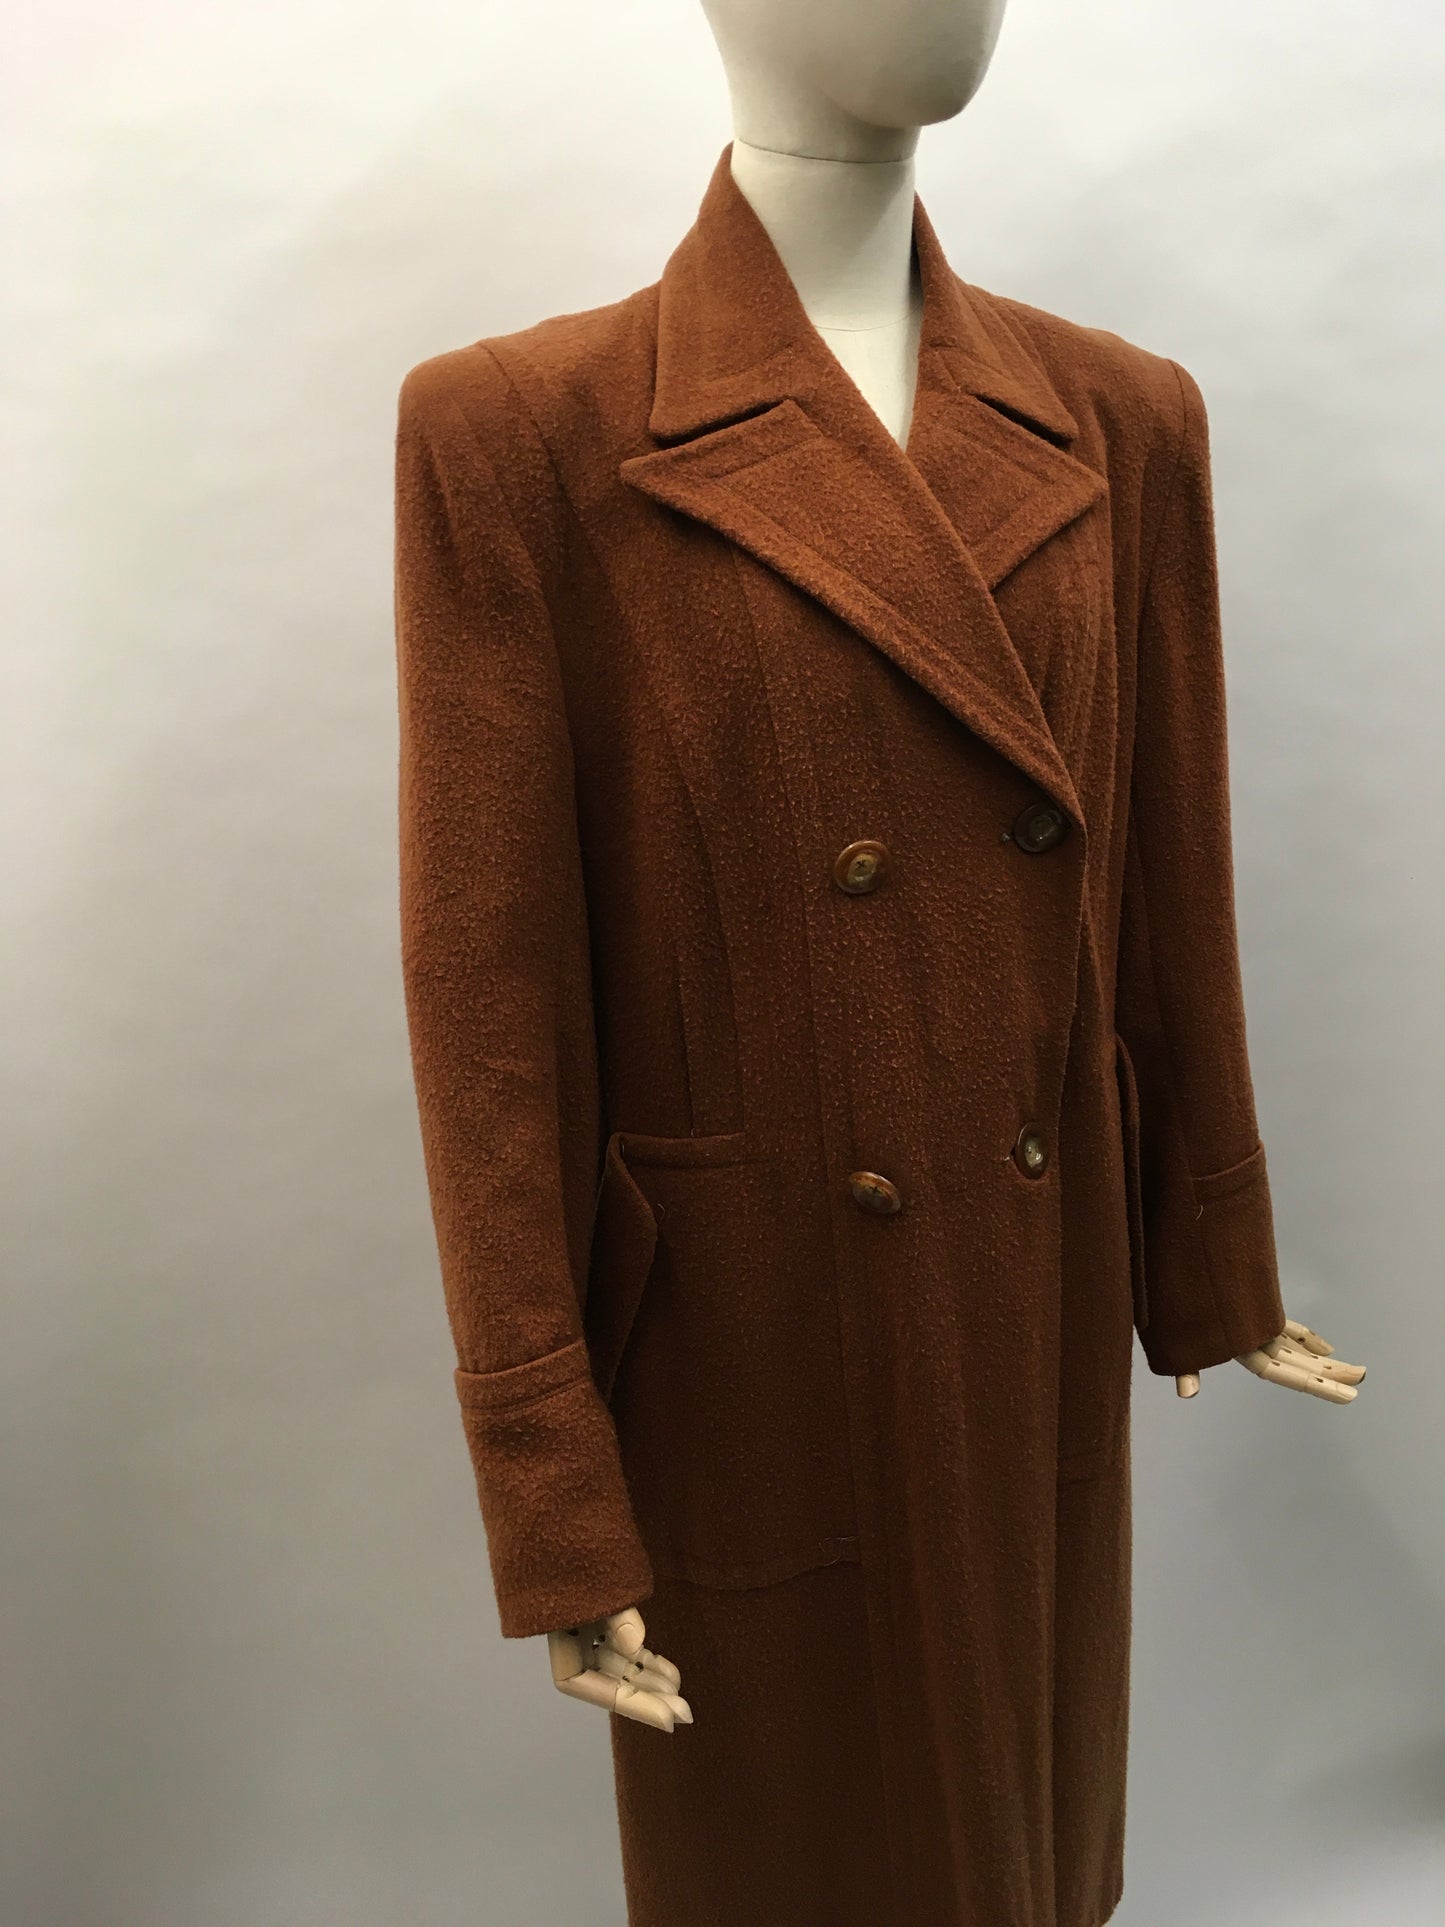 Original 1940s Utility CC41 Rust Coat - Exquisitely Tailored in a lovely soft rust wool